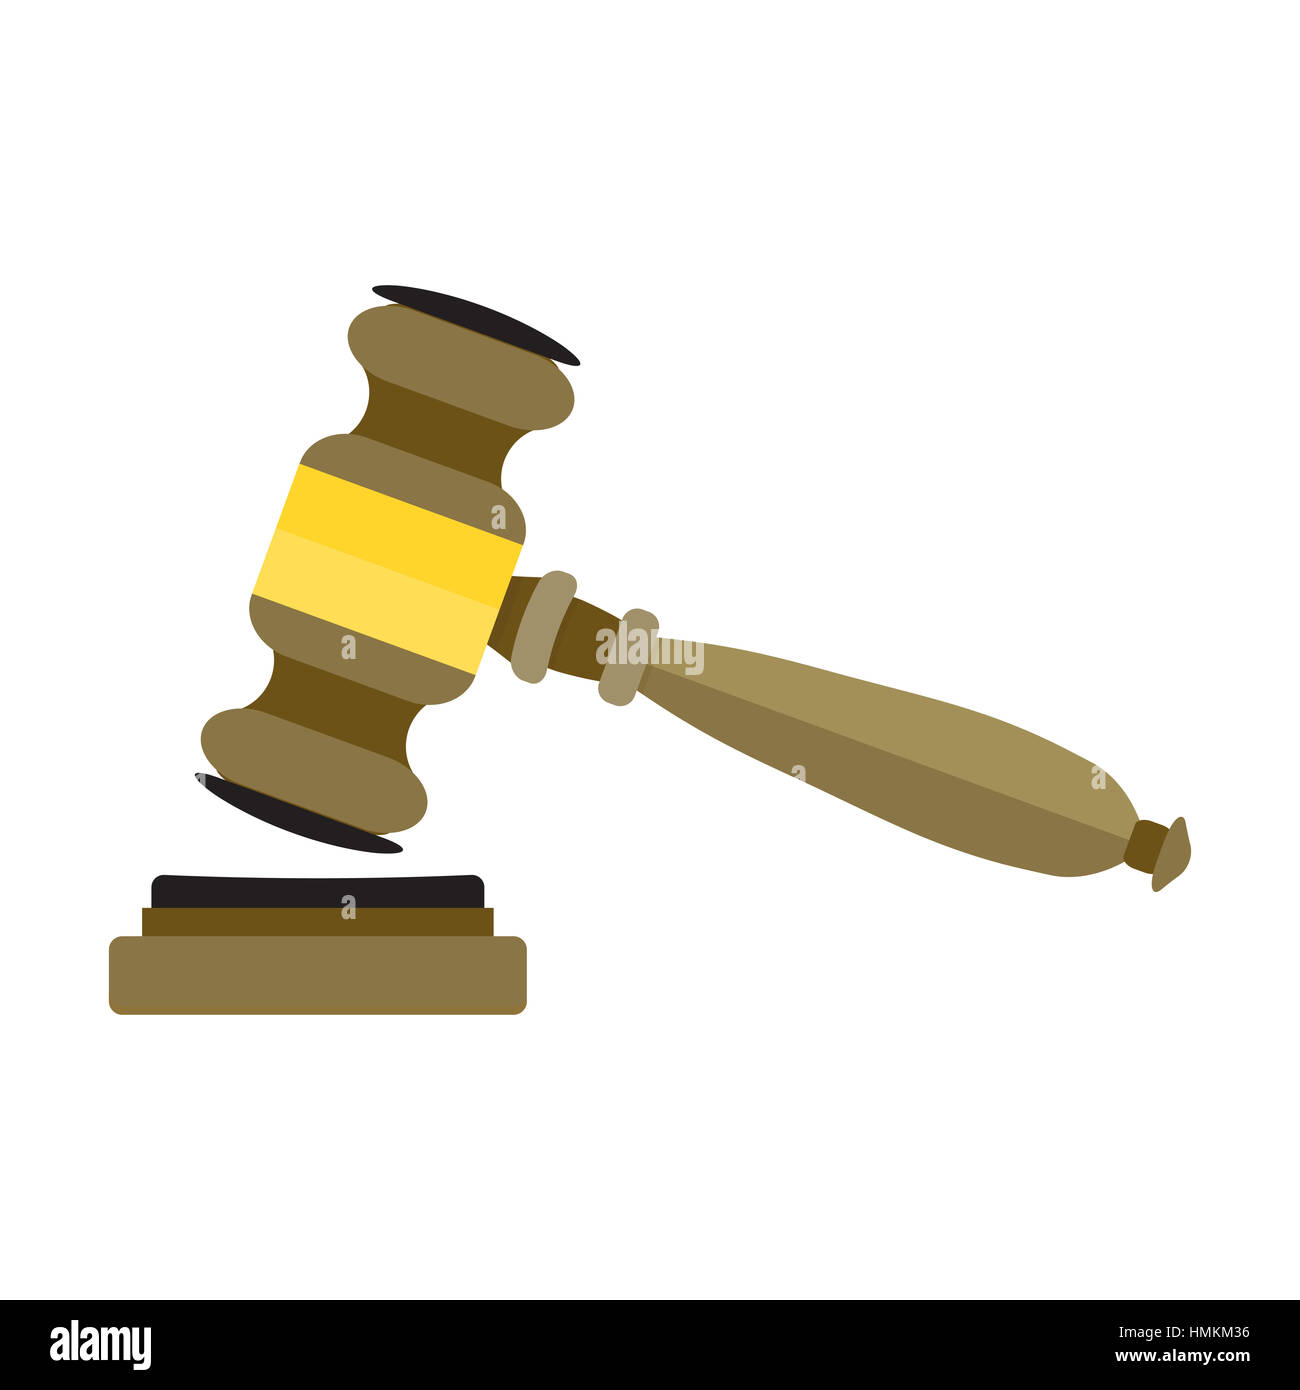 Gavel flat vector. Legal law and auction symbol, justice mallet illustration Stock Photo